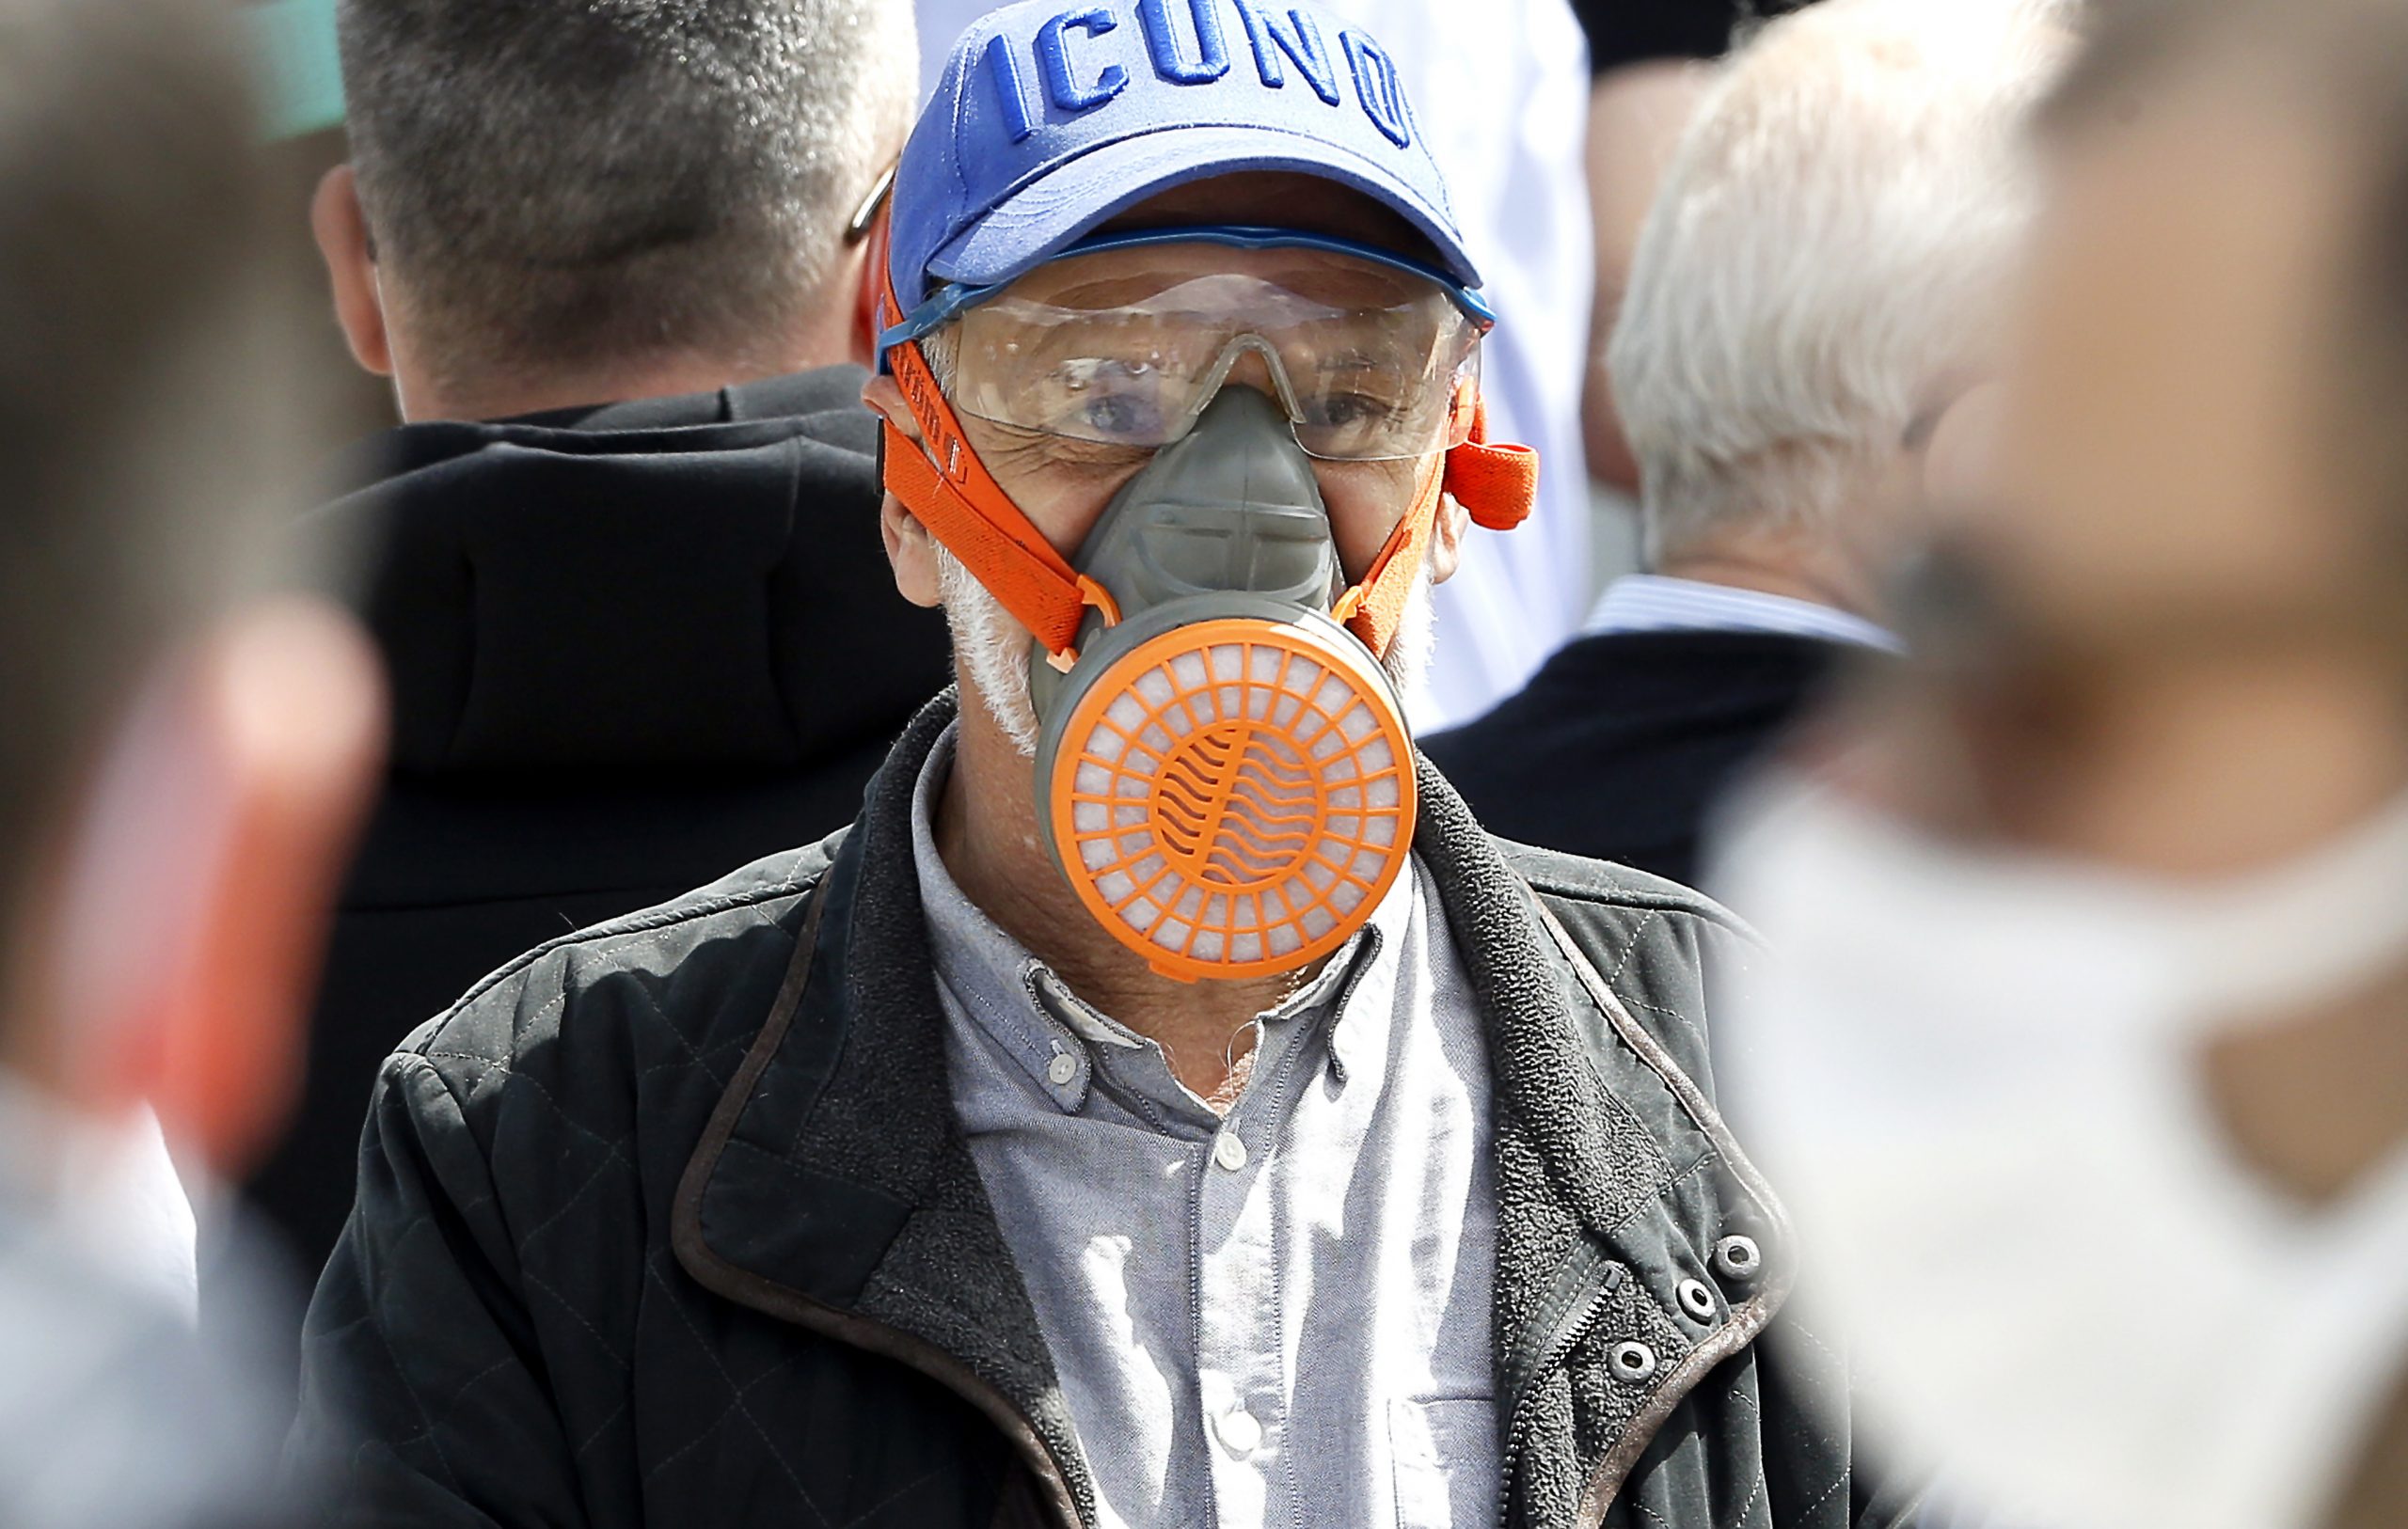 epa08393624 A Bosnian man wears a protective face mask amid the ongoing coronavirus COVID-19 pandemic in Sarajevo, Bosnia and Herzegovina, 30 April 2020. Countries around the world are taking increased measures to stem the widespread of the SARS-CoV-2 coronavirus which causes the COVID-19 disease.  EPA/FEHIM DEMIR